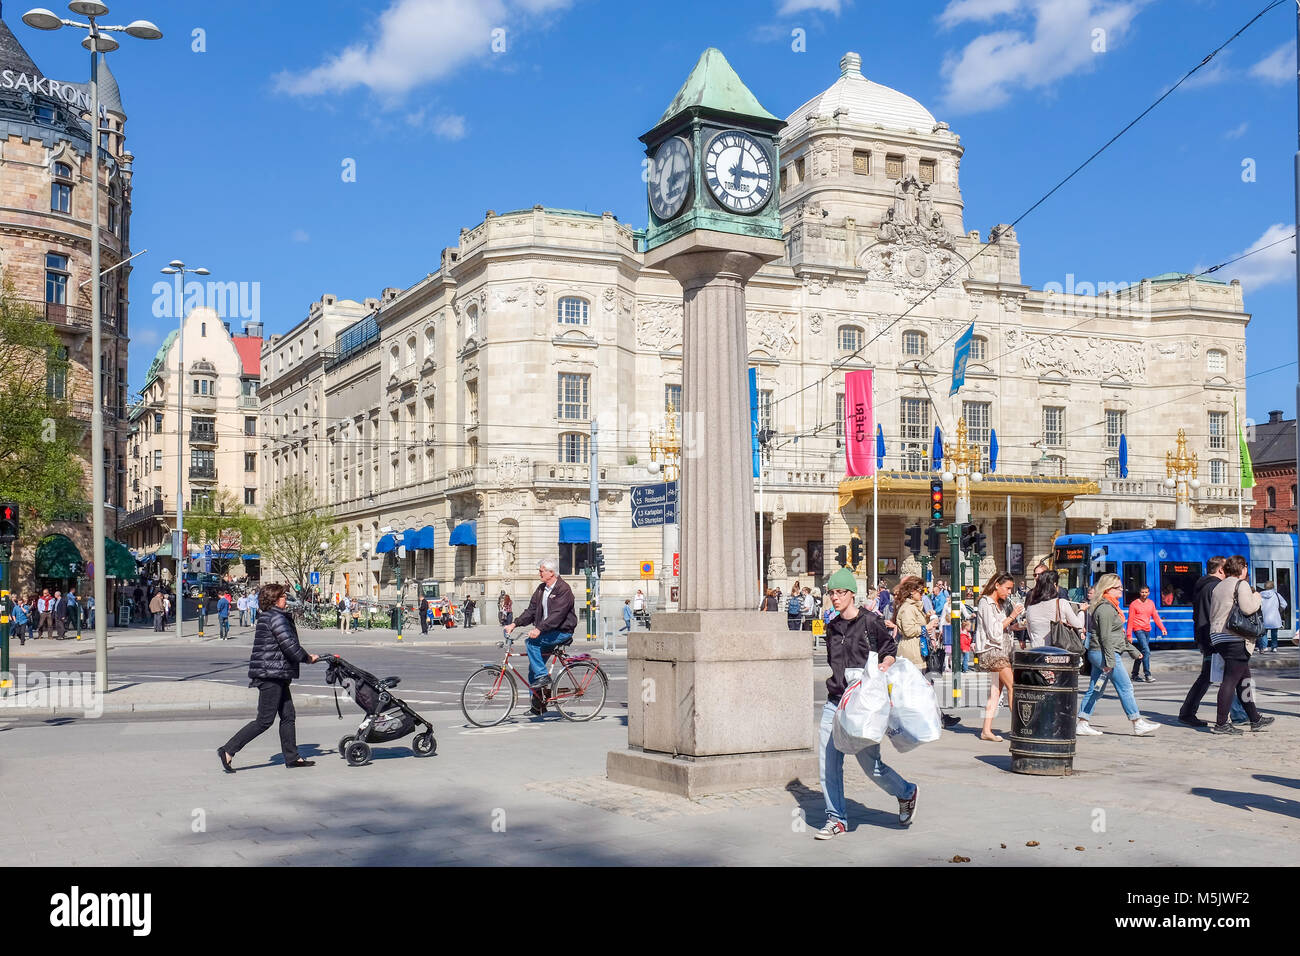 ”Dramaten” the Royal Dramatic theatre at Nybroplan during springtime in Stockhom. Stock Photo